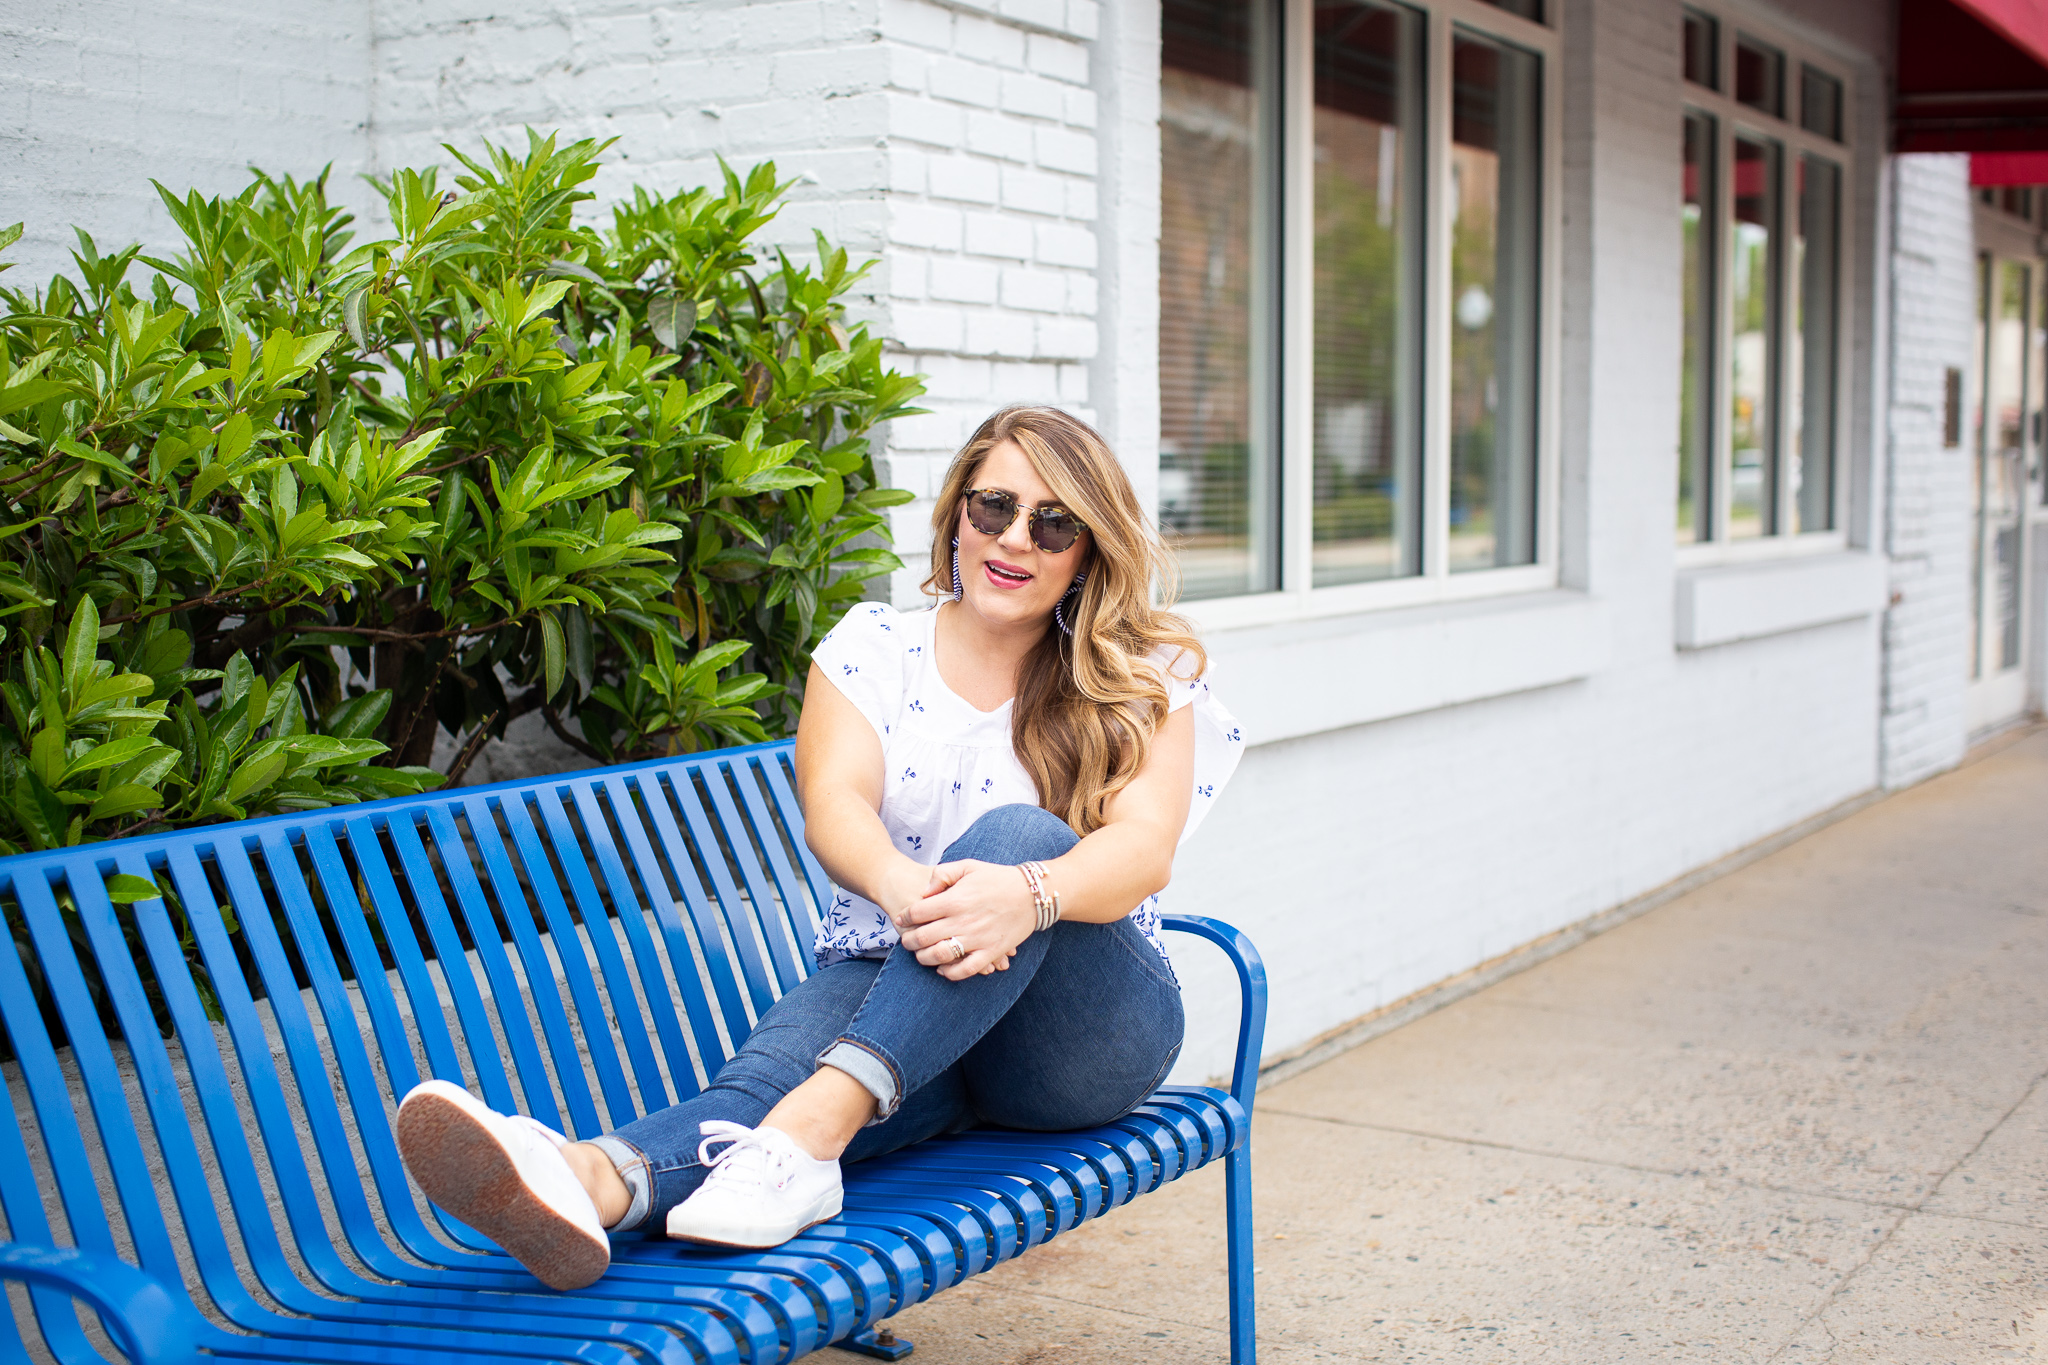 Eyelet Top for Summer, featured by popular North Carolina fashion blogger, Coffee Beans and Bobby Pins